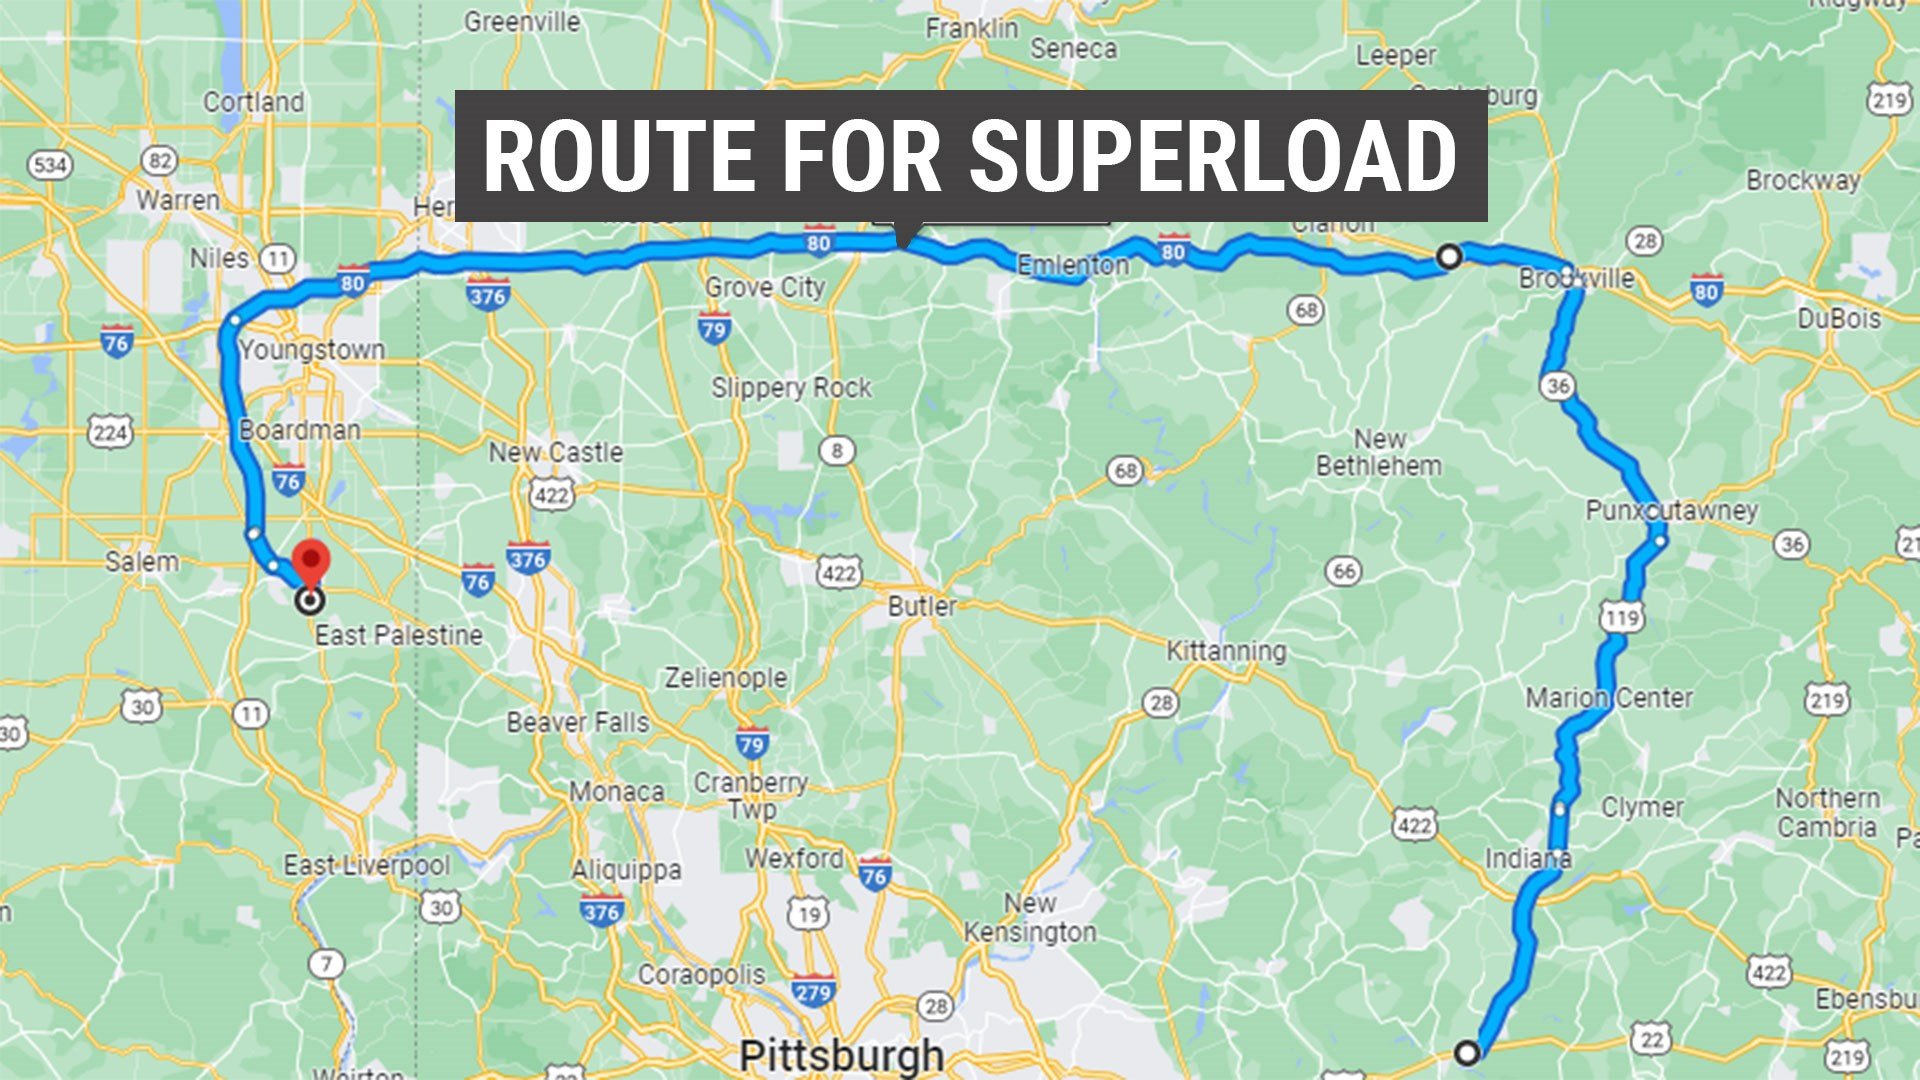 Route for superload